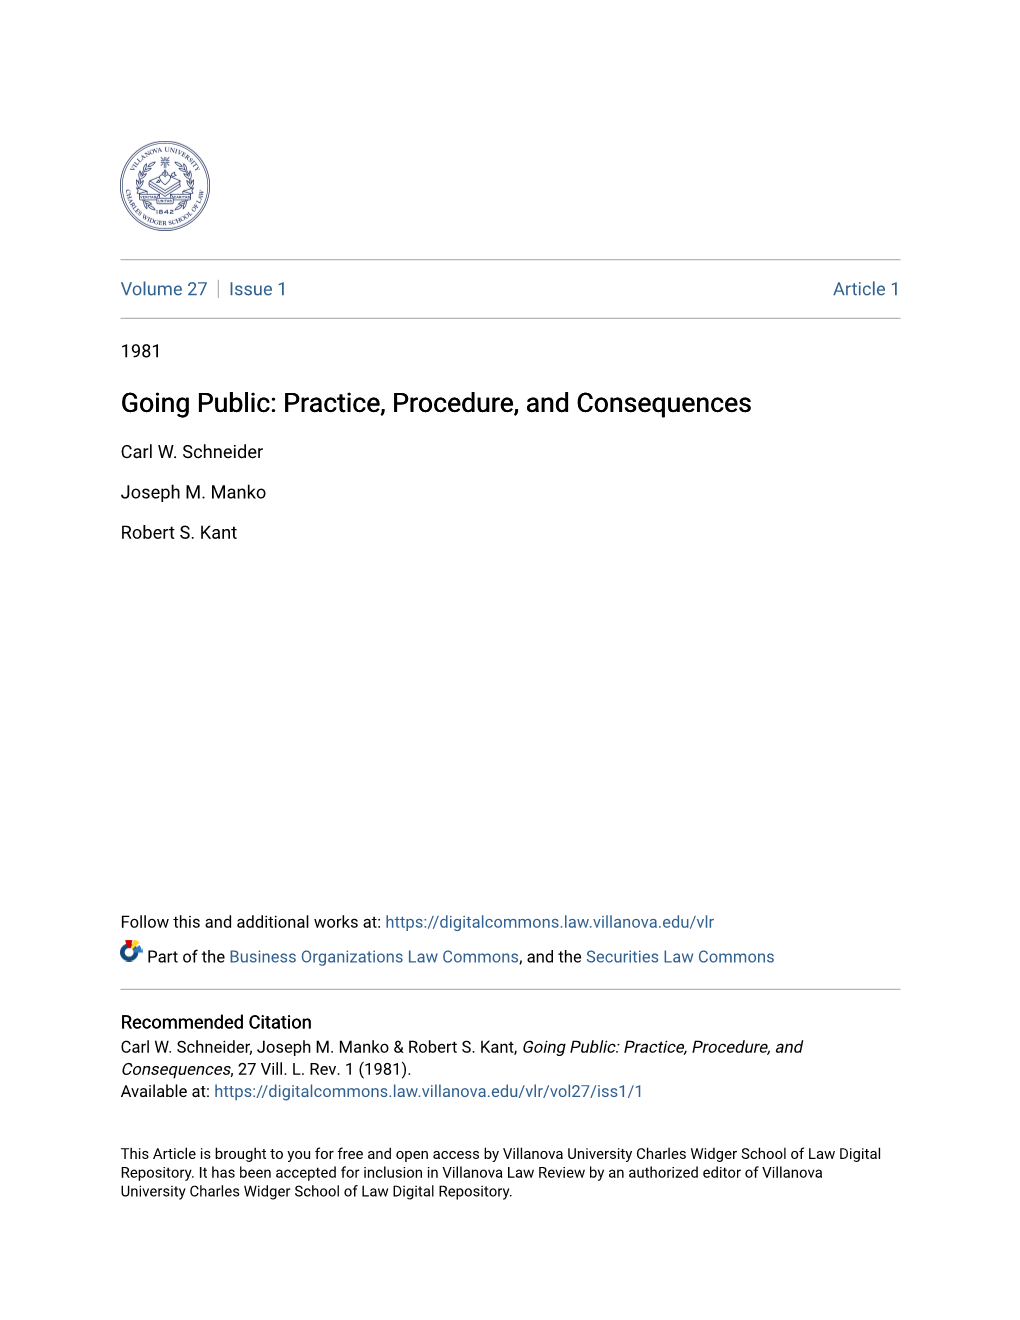 Going Public: Practice, Procedure, and Consequences